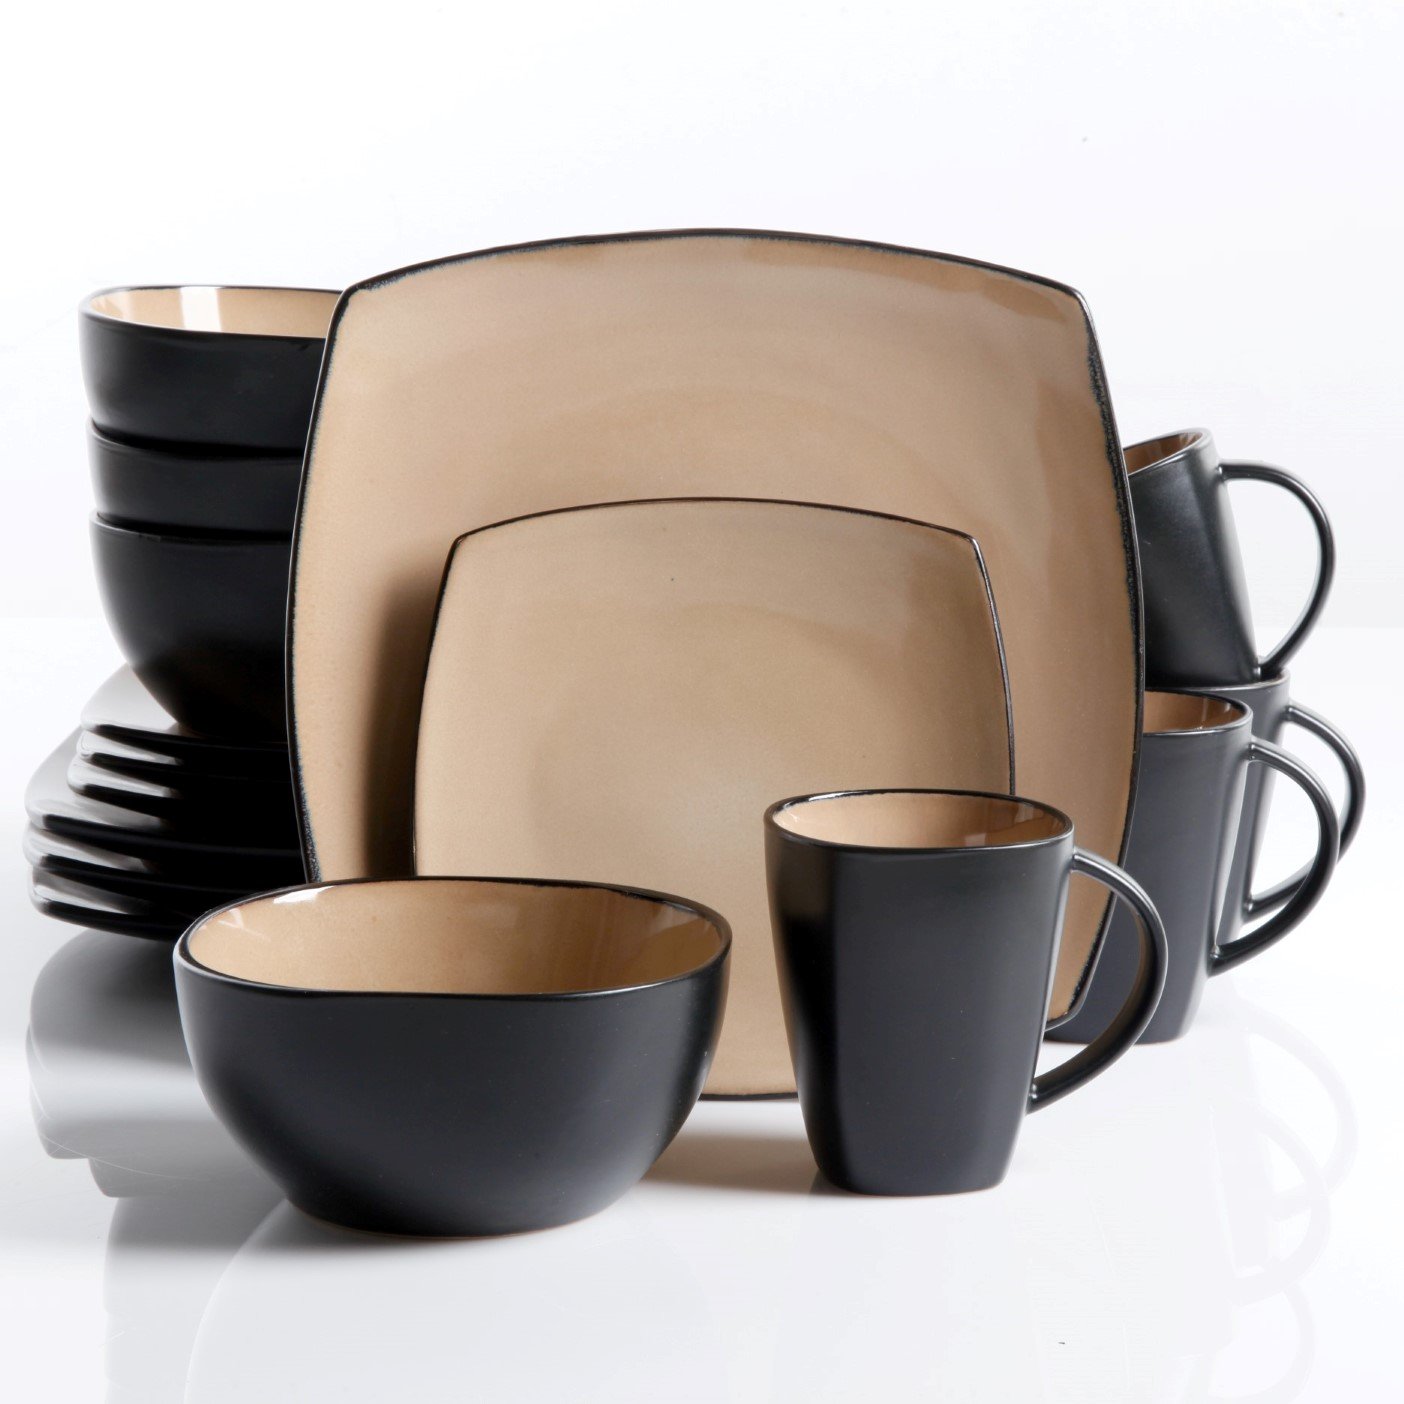 Gibson Elite Soho Lounge Reactive Glaze 16 Piece Dinnerware Set in Taupe; Includes 4 Dinner Plates; 4 Dessert Plates, 4 Bowls and 4 Mugs, Only $25.59